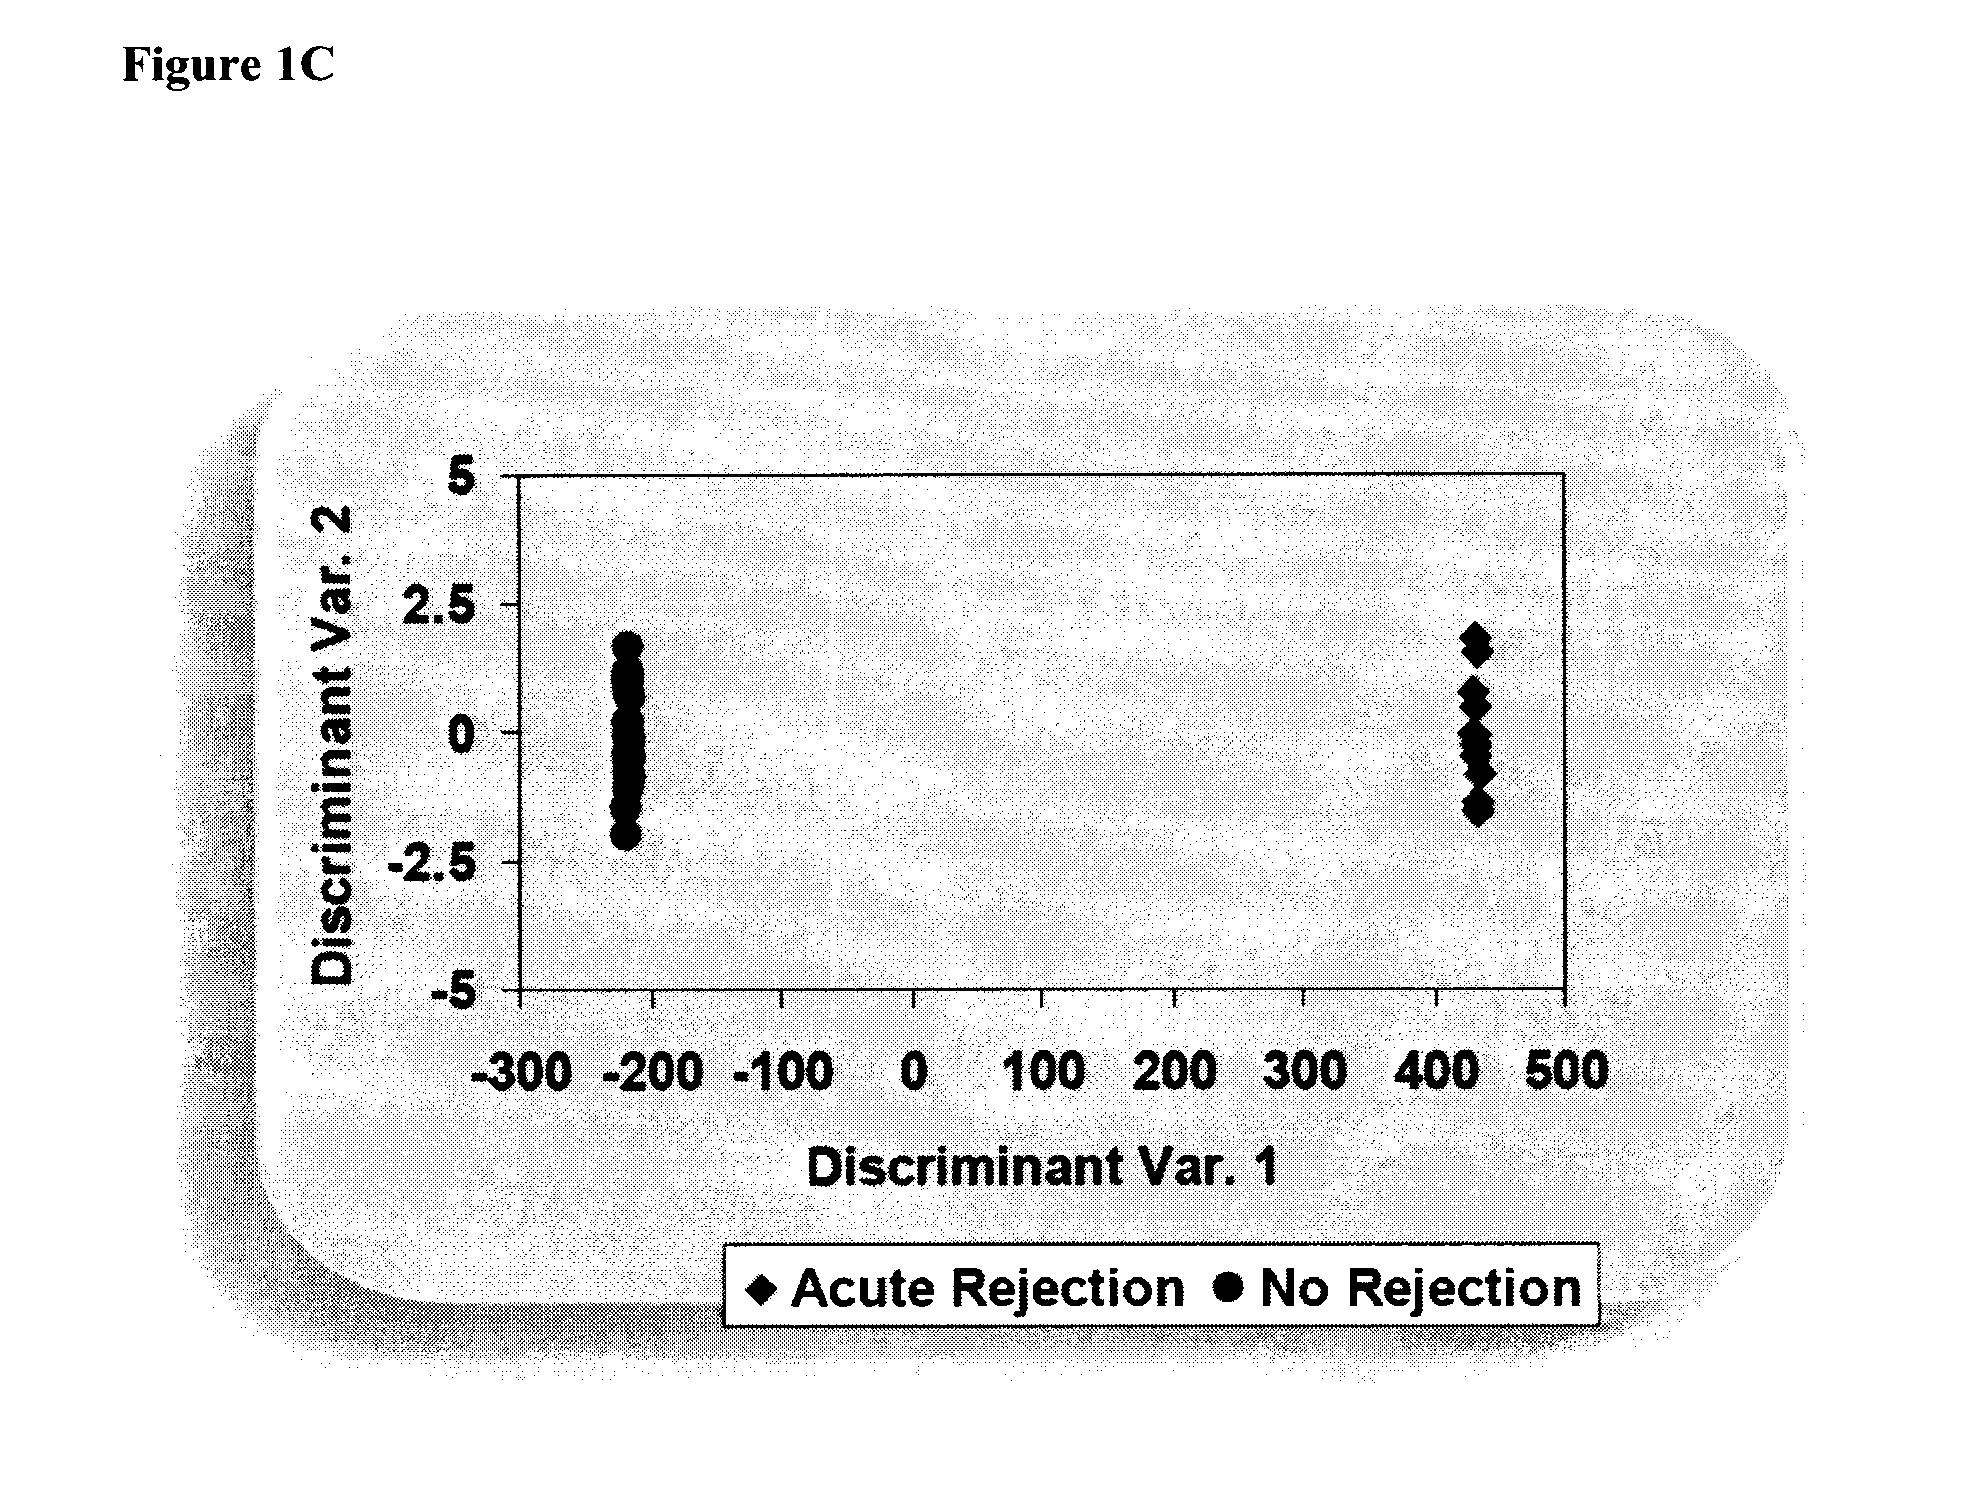 Methods of Diagnosing Rejection of a Kidney Allograft Using Genomic or Proteomic Expression Profiling